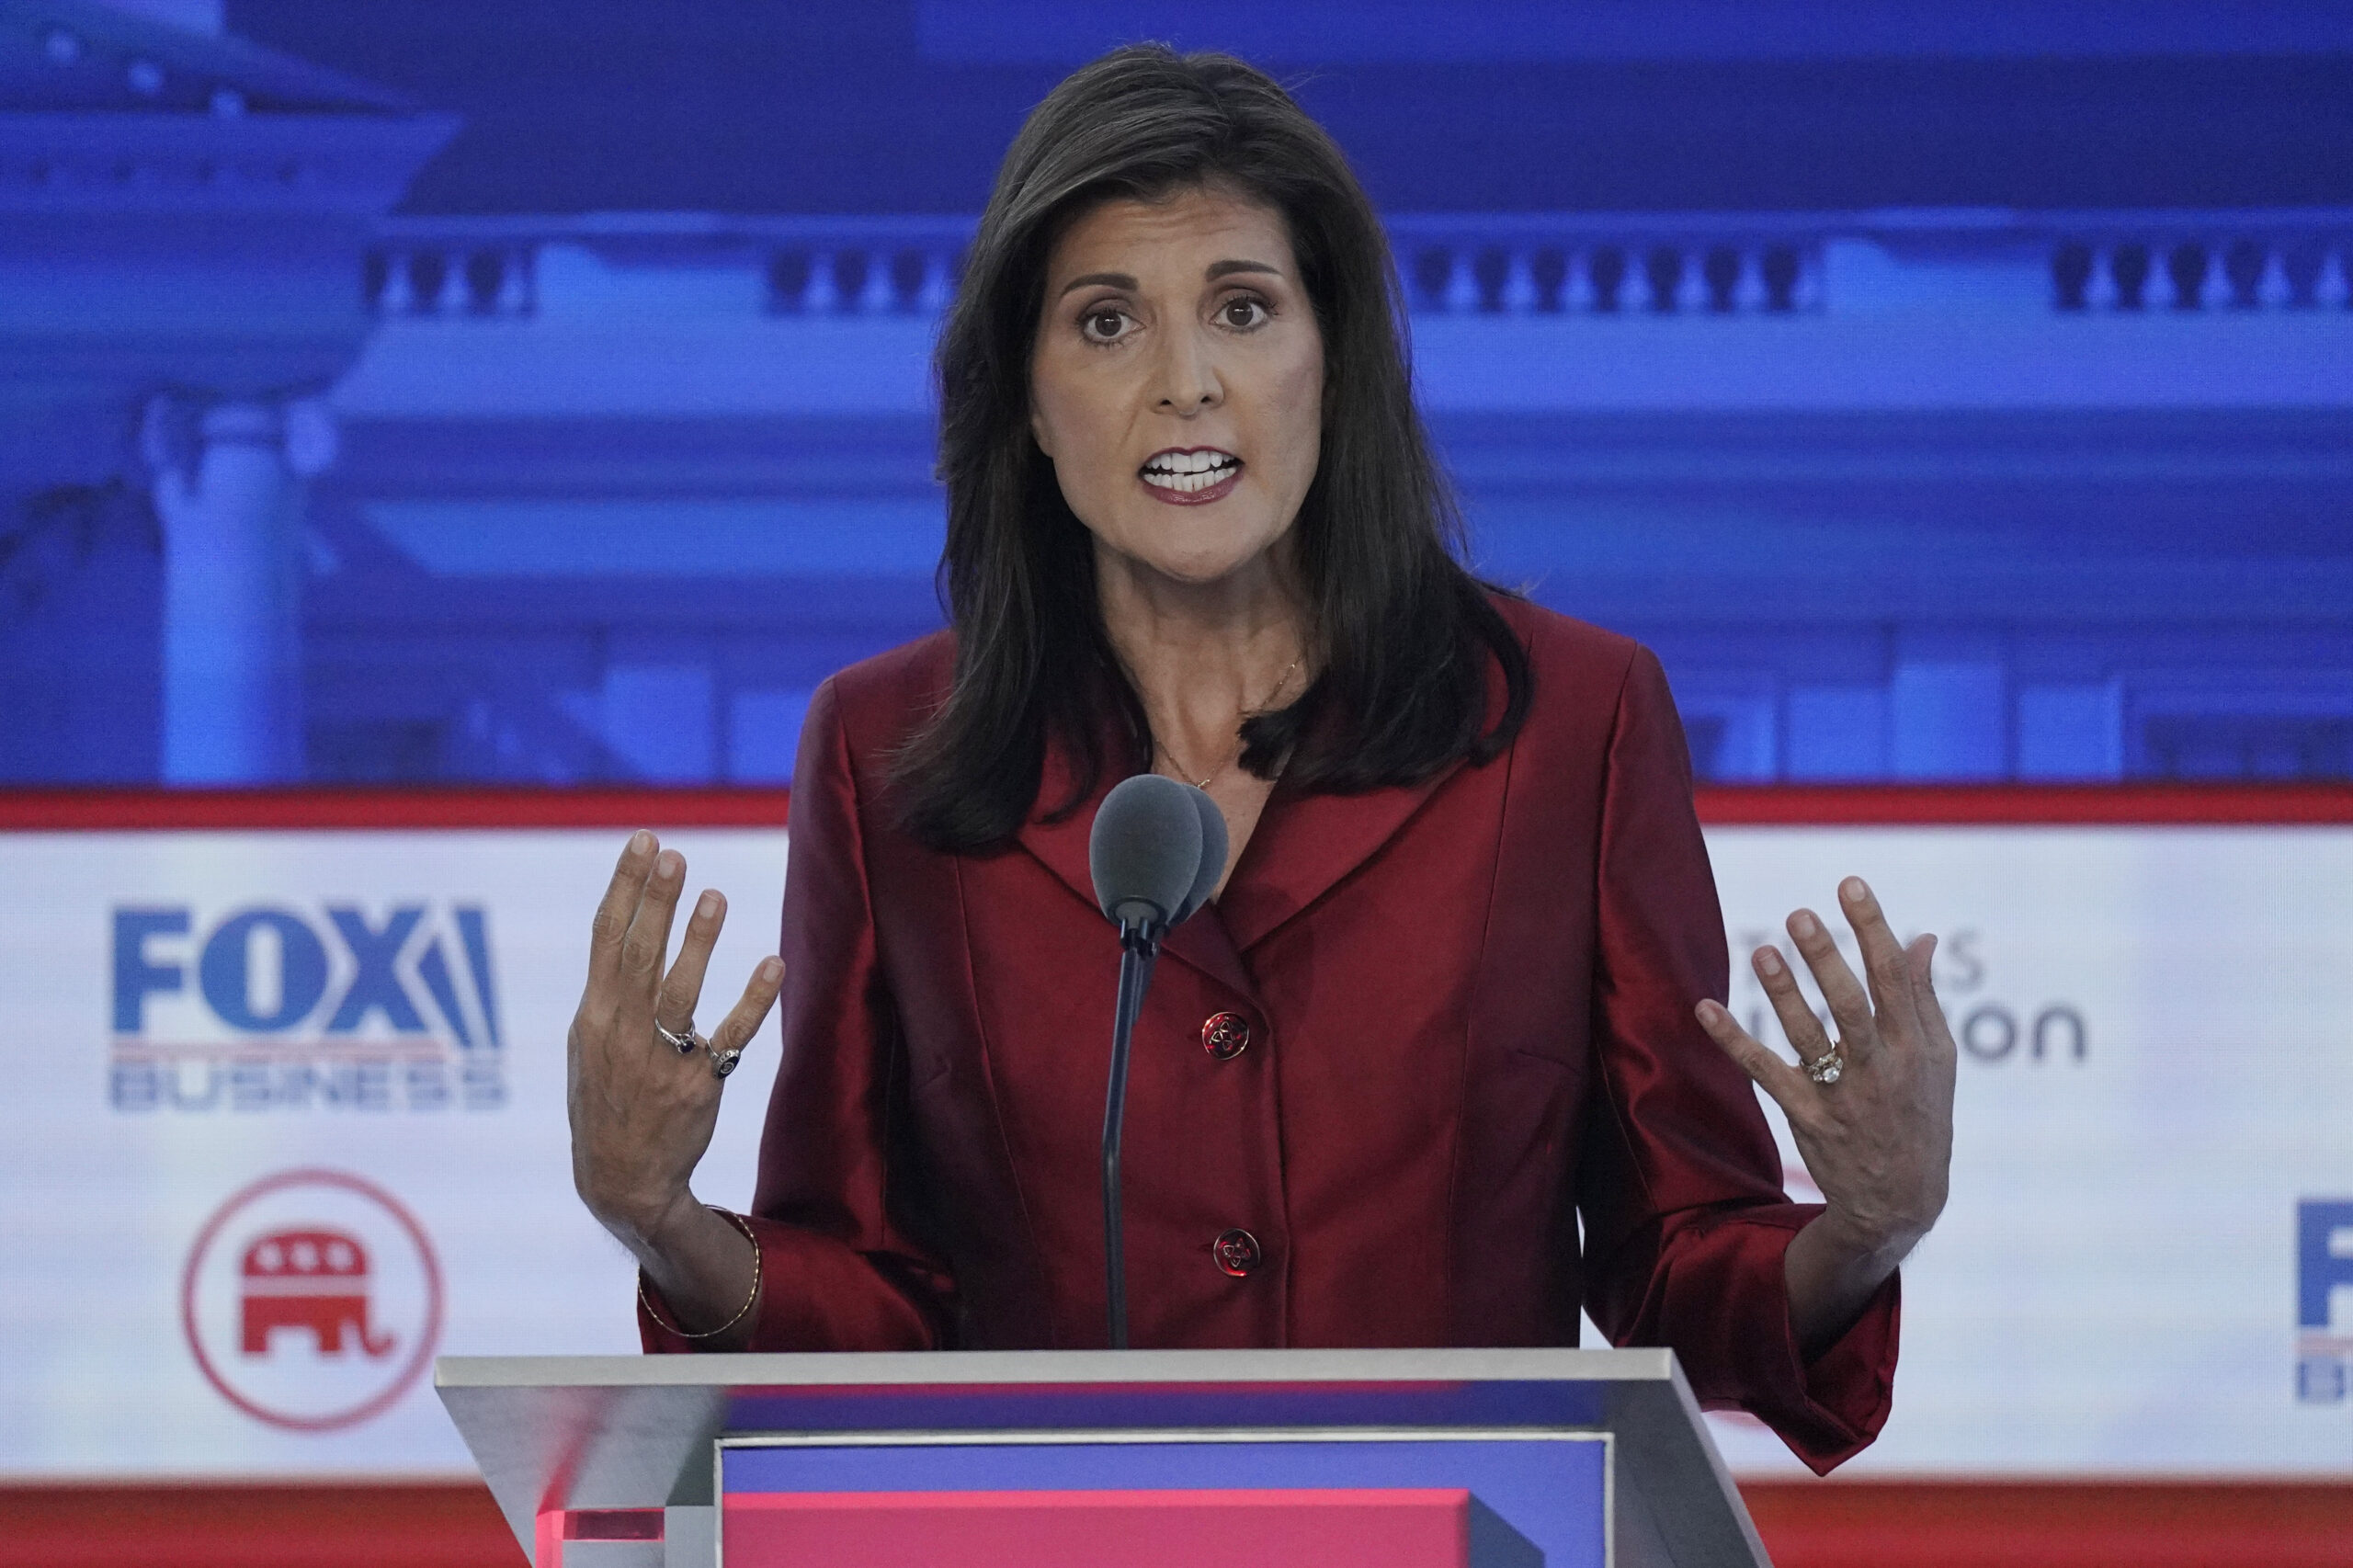 Trump Campaign Digs Up Dirt on Haley Following GOP Debate: ‘Hillary Clinton Is an Inspiration to Nikki’